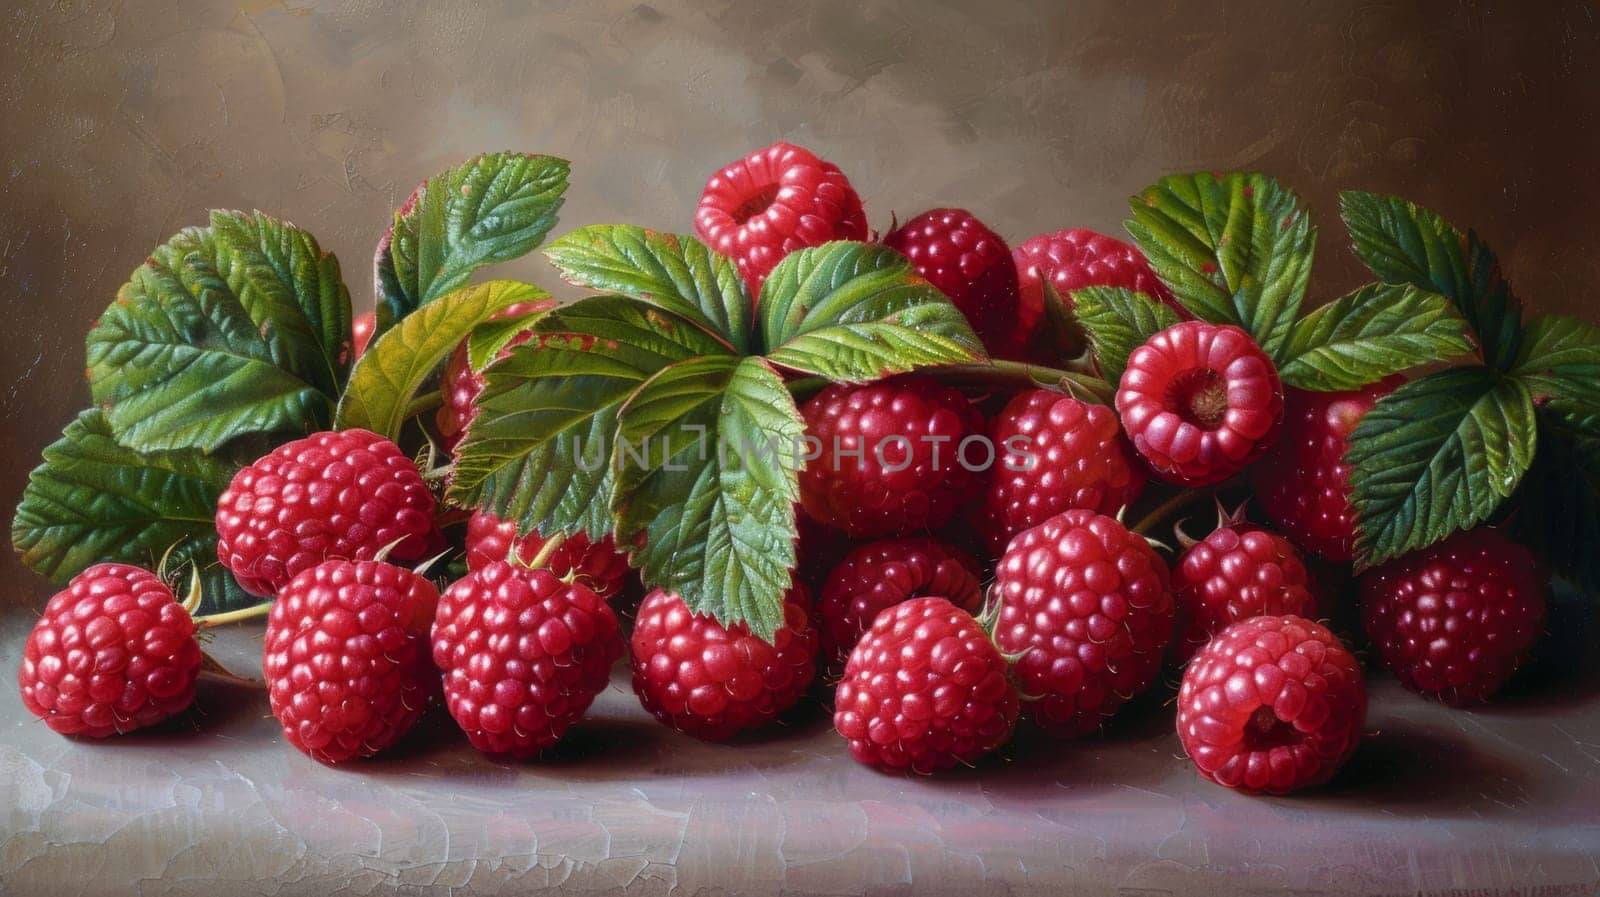 A painting of a bunch of raspberries with leaves on them